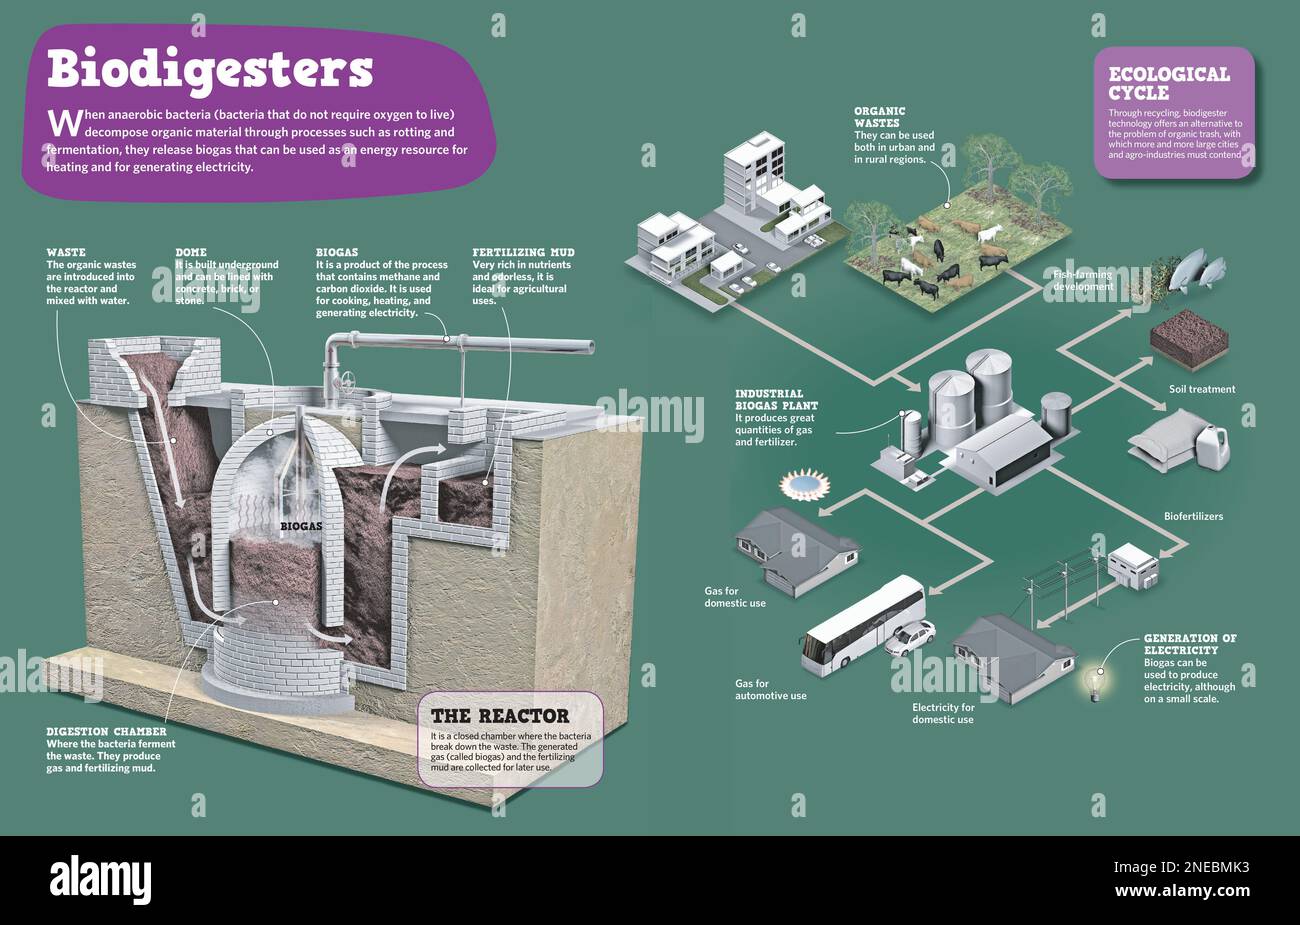 Infographic on bio-digesters or organic waste digesters, and how within the reactors, the bacteria break down the waste. [Adobe InDesign (.indd); 4960x3188]. Stock Photo